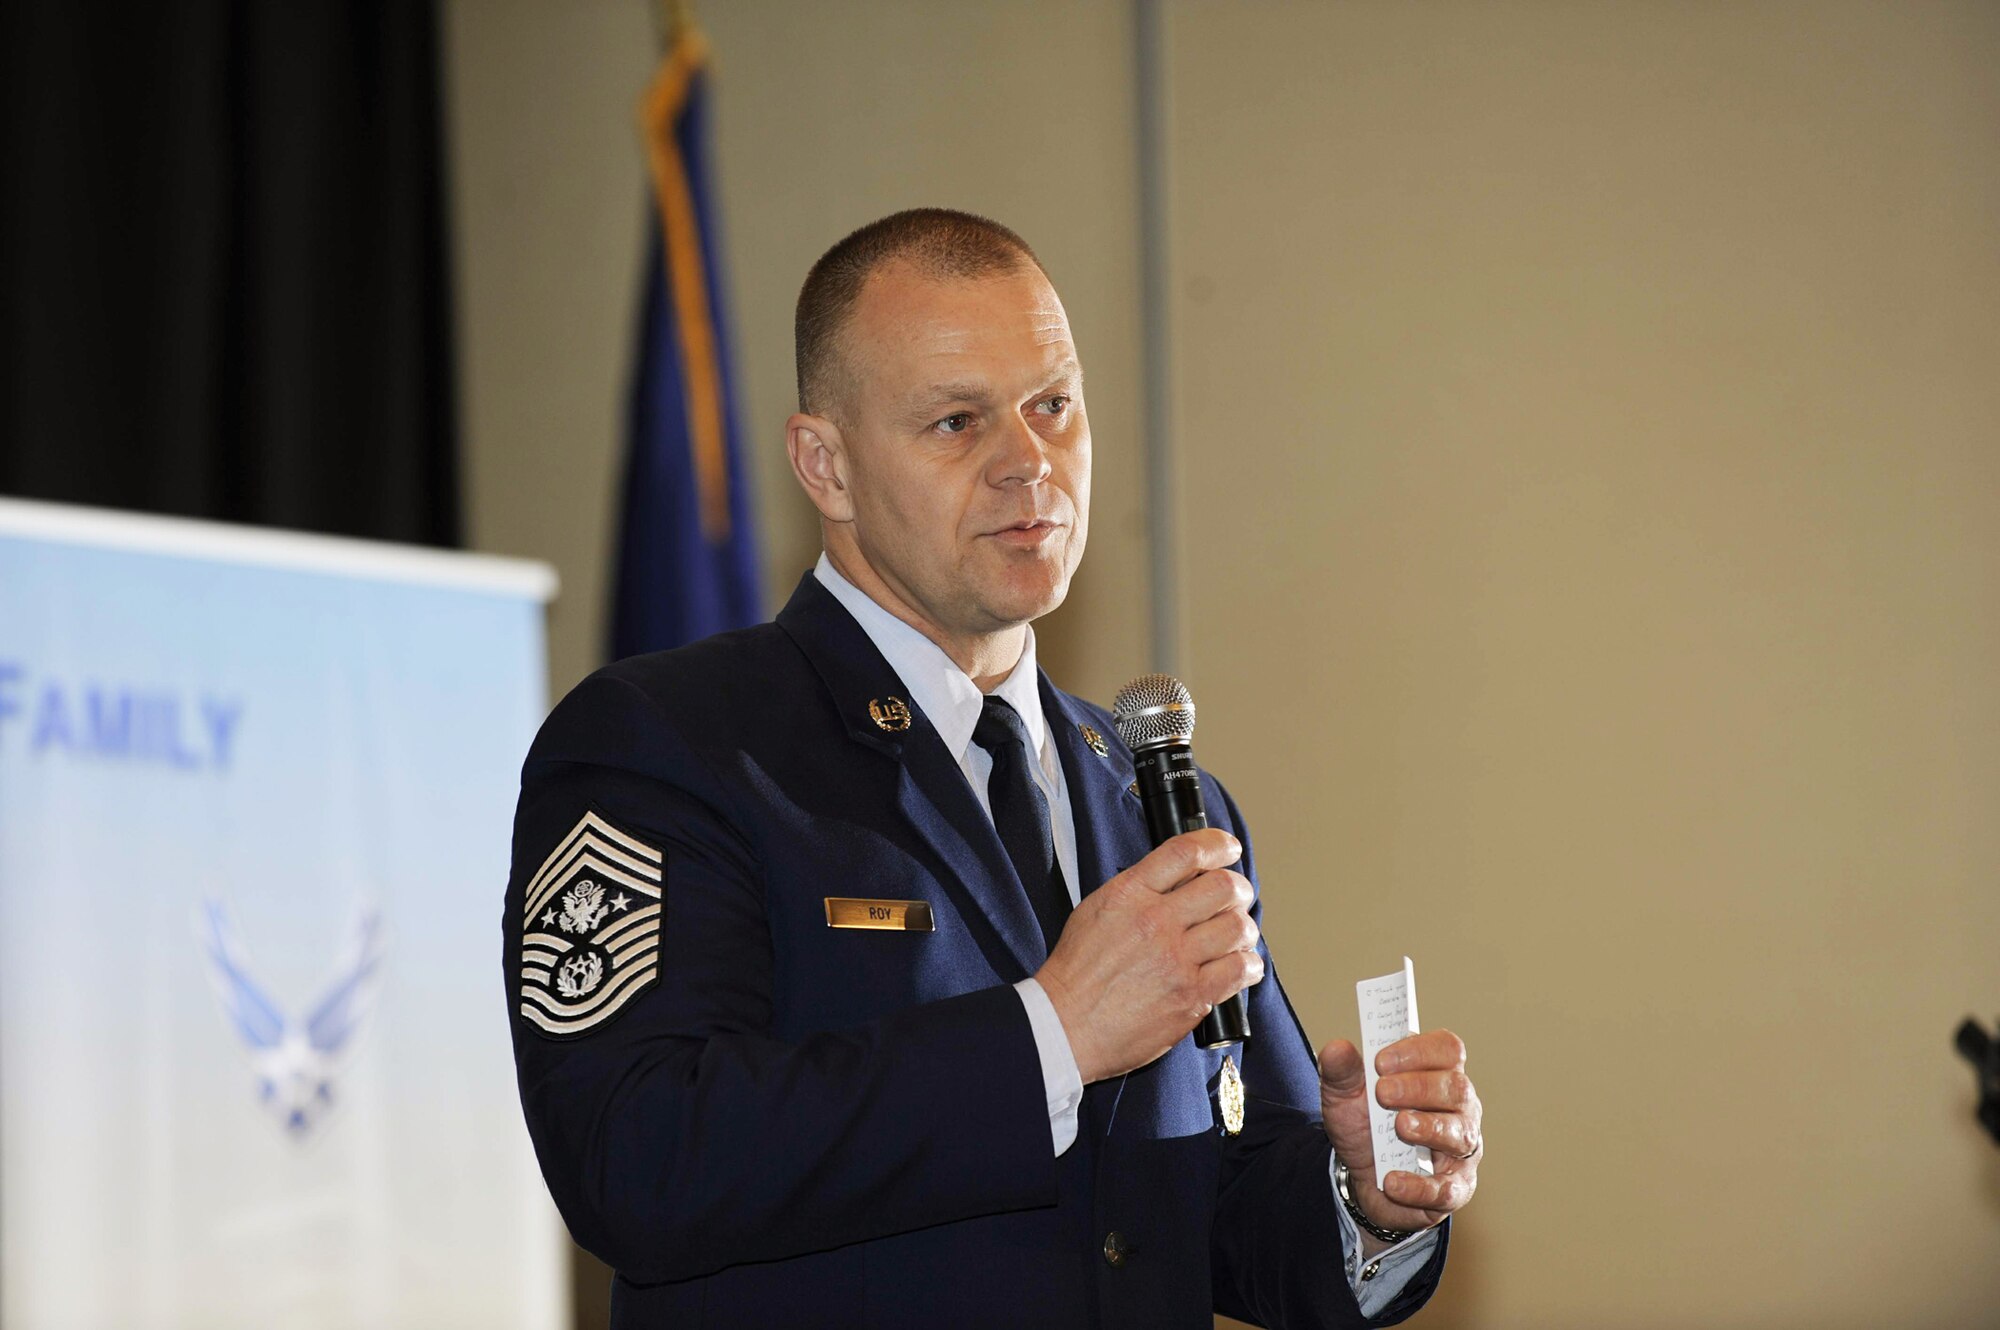 Chief Master Sergeant of the Air Force James Roy addresses attendees April 19 at the second annual Caring for People forum in Washington, D.C.  Approximately 250 active-duty, Guard and Reserve Airmen and civilians gathered for the second
annual forum to address issues such as deployments, schools and housing, health and wellness, the unique challenges for families with special needs, single Airmen, and Guard and Reserve members.  (U.S. Air Force photo/Andy Morataya)